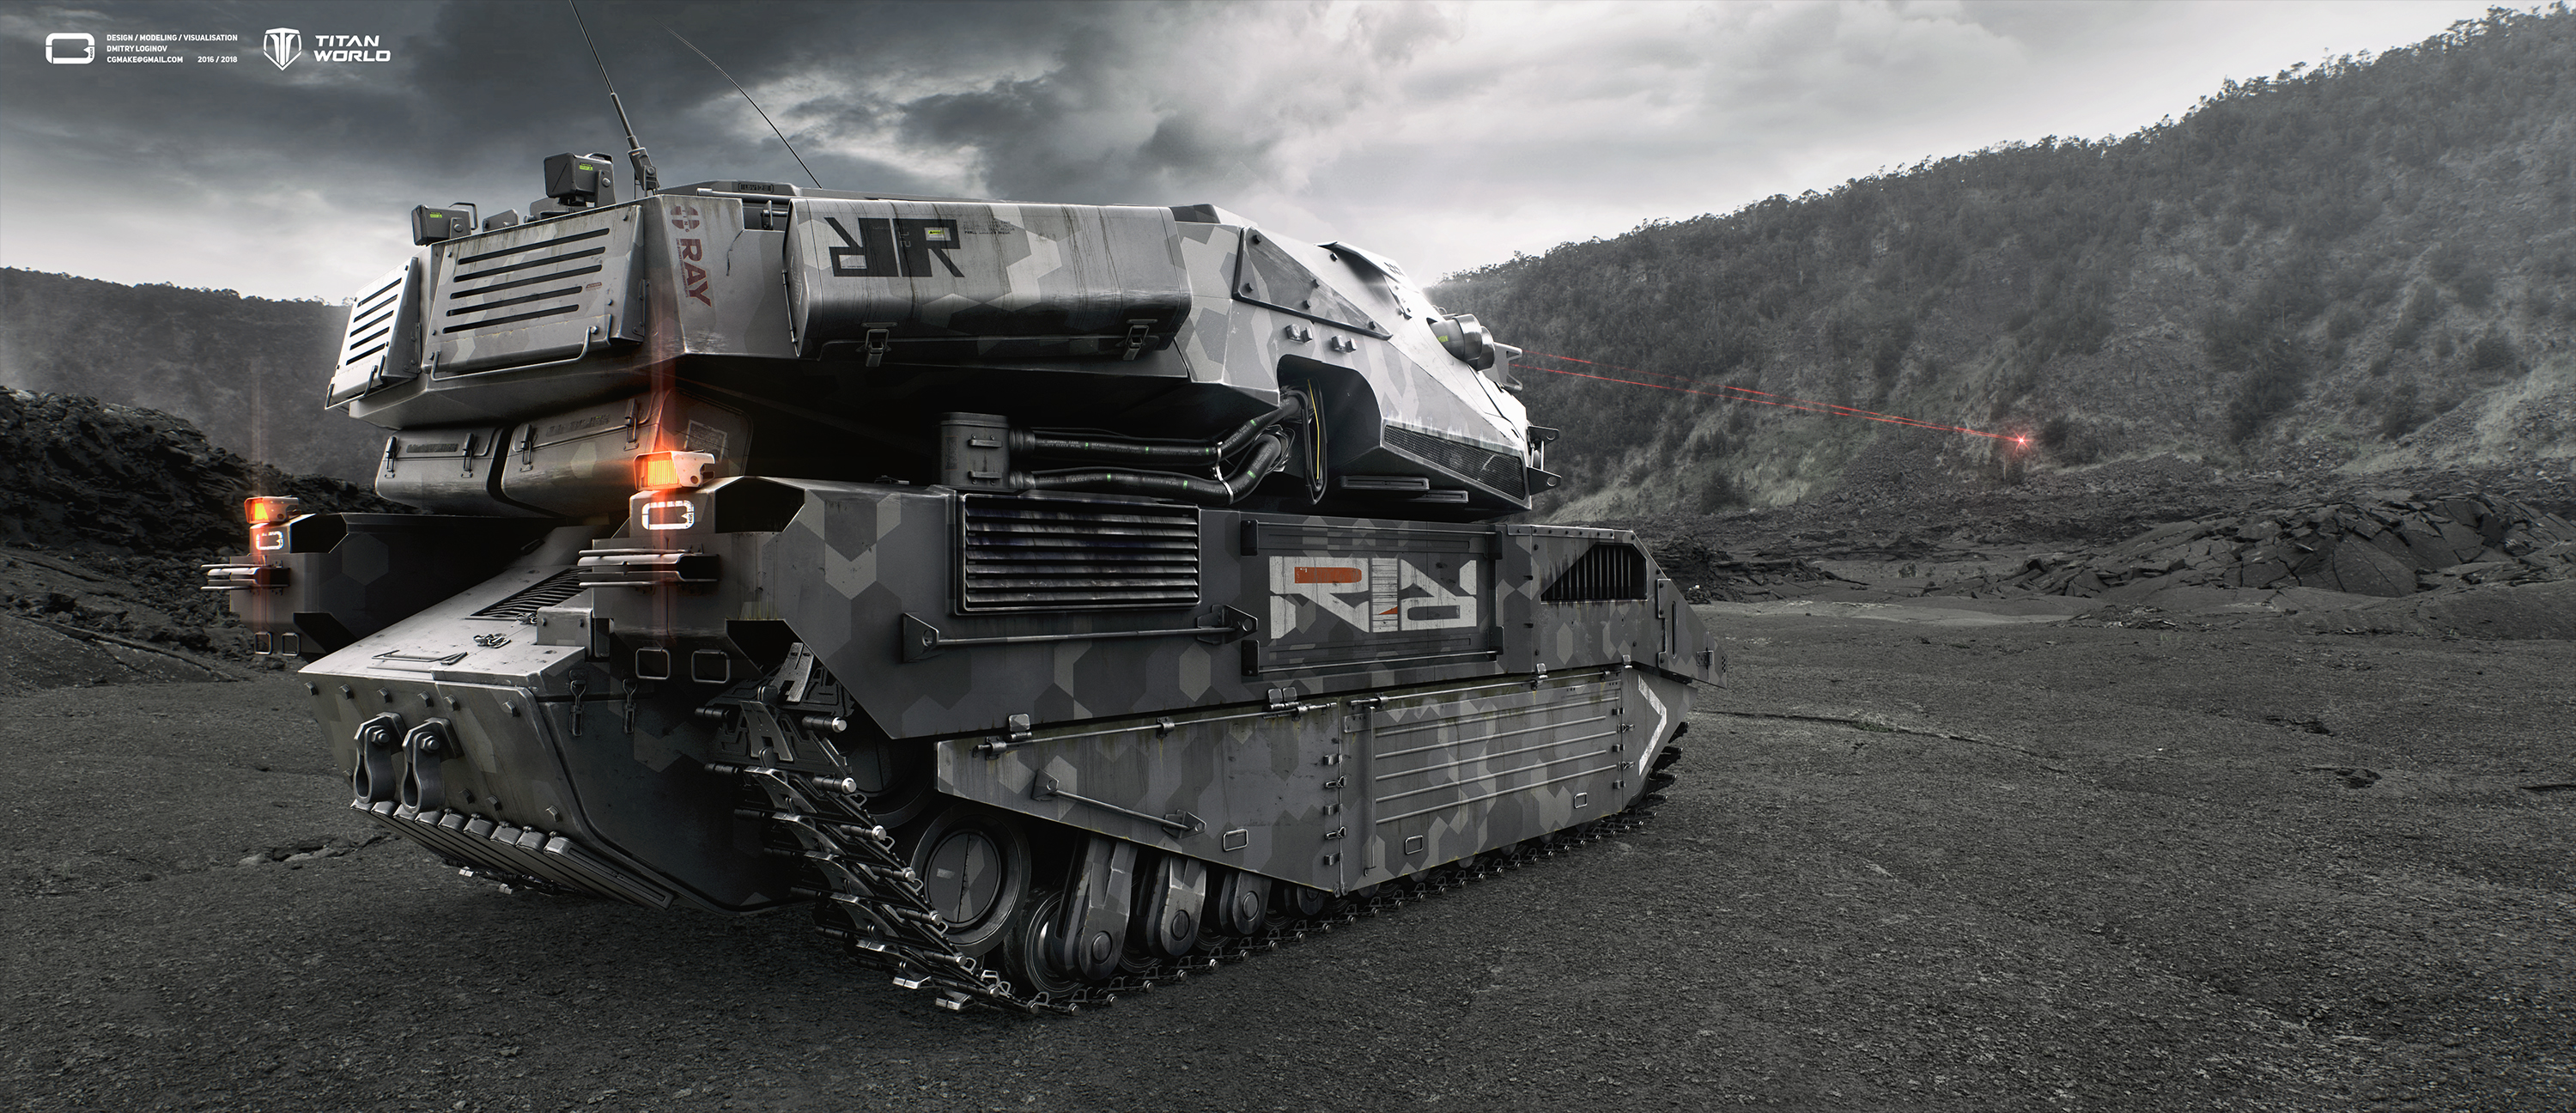 SIEGE TANK in 3d max vray 3.0 image